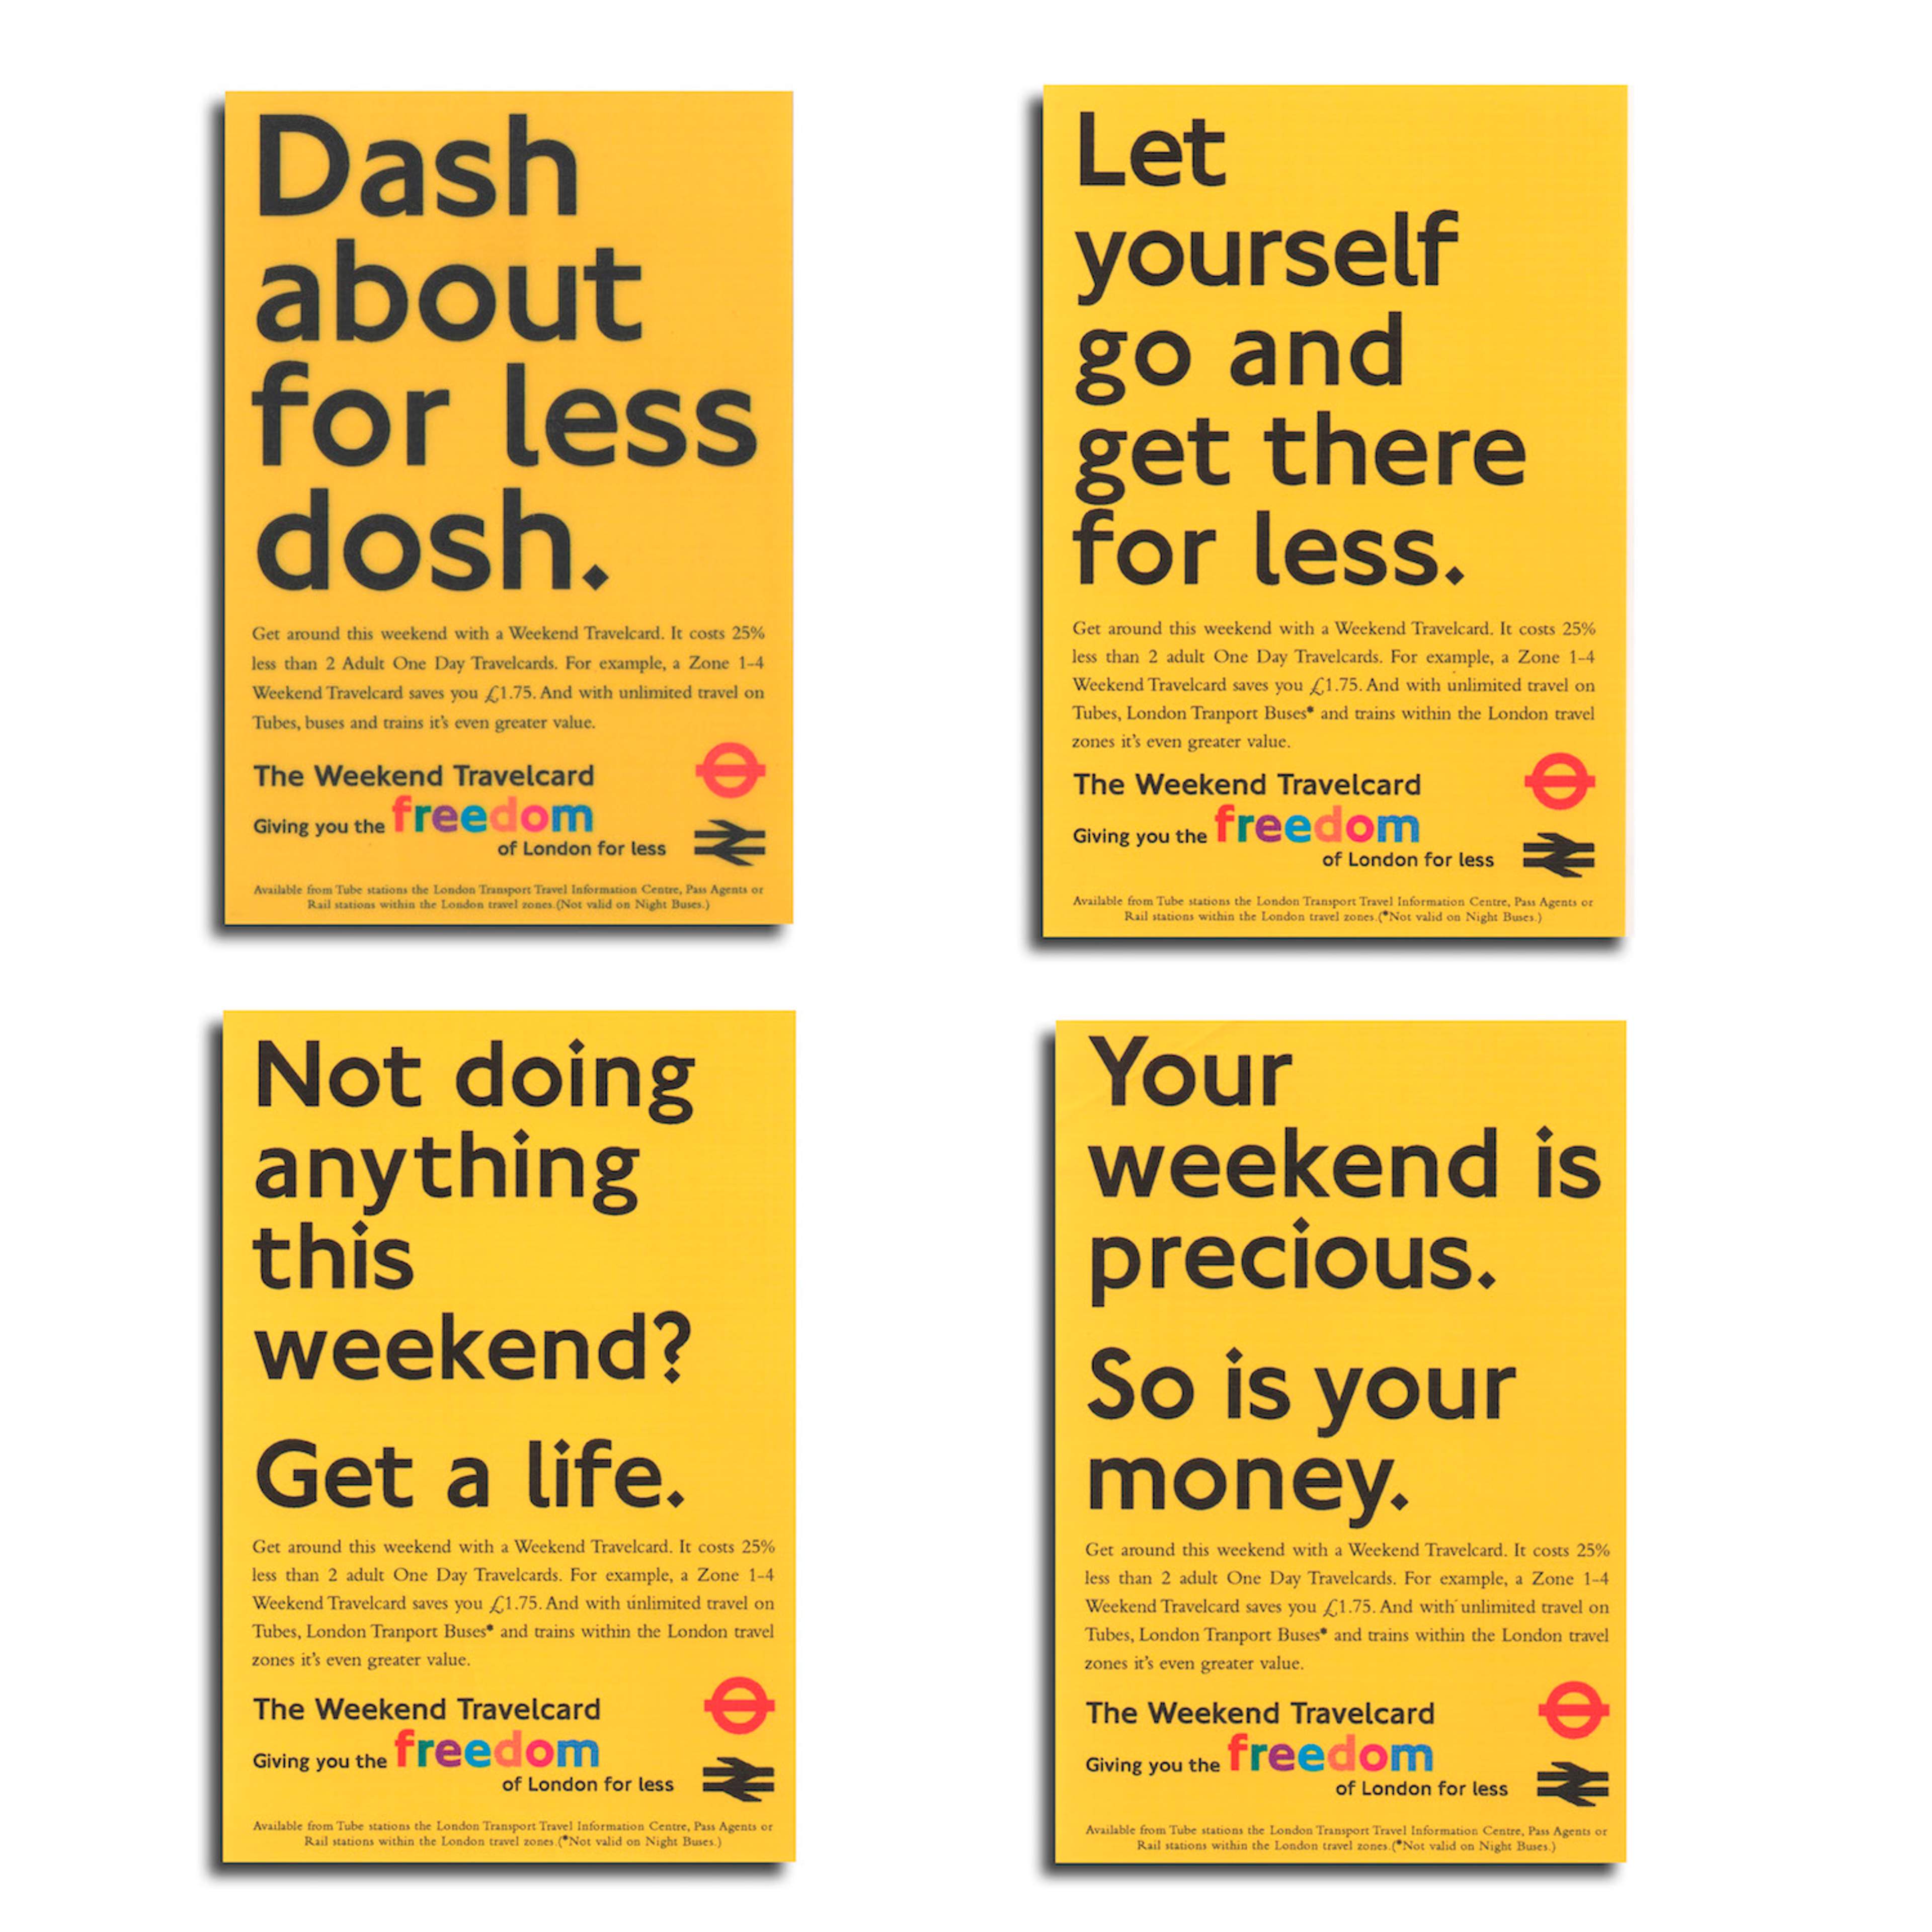 Press advertising for The Weekend Travelcard by Transport for London.